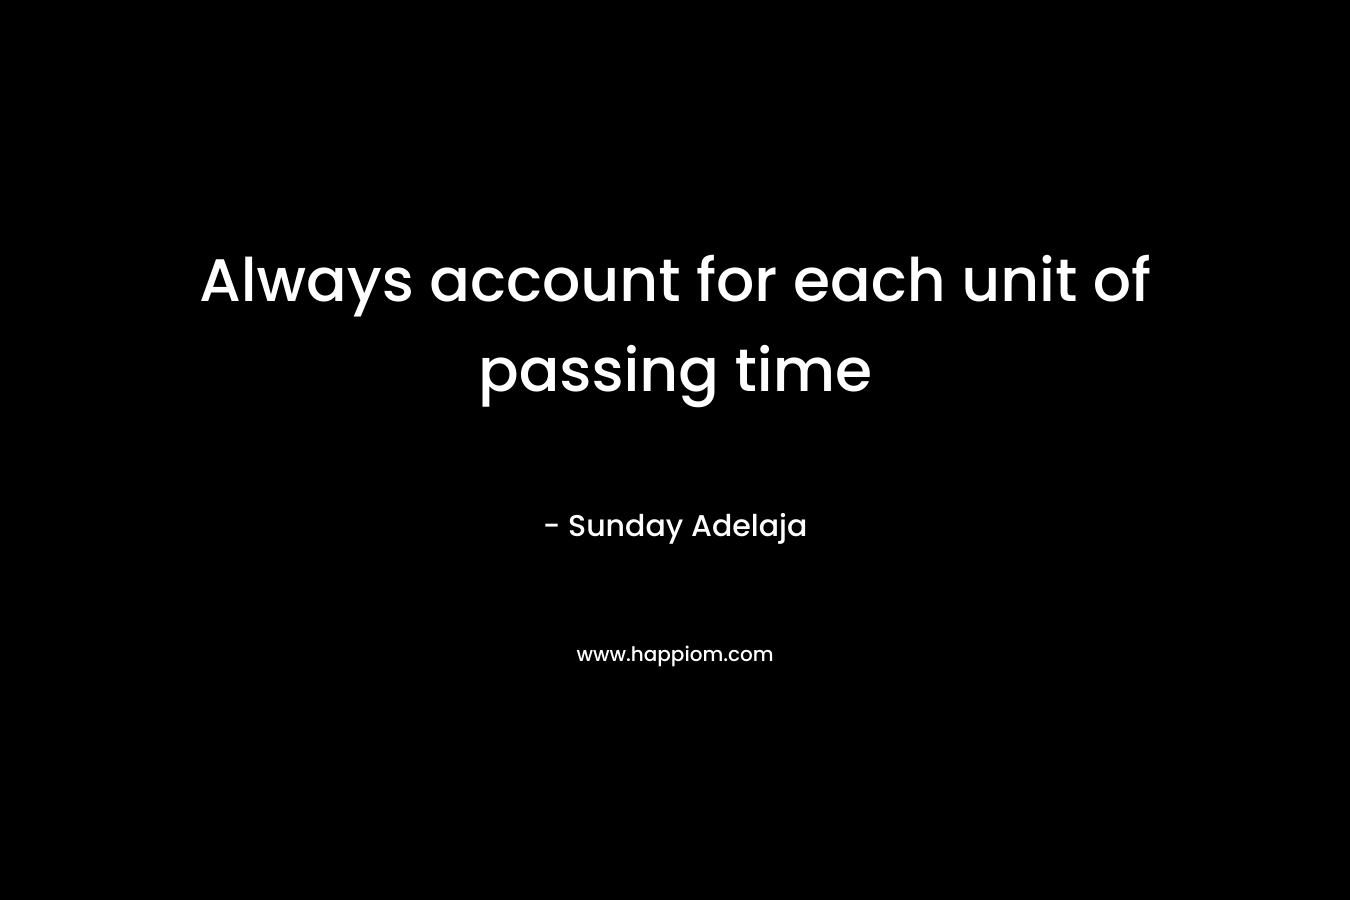 Always account for each unit of passing time